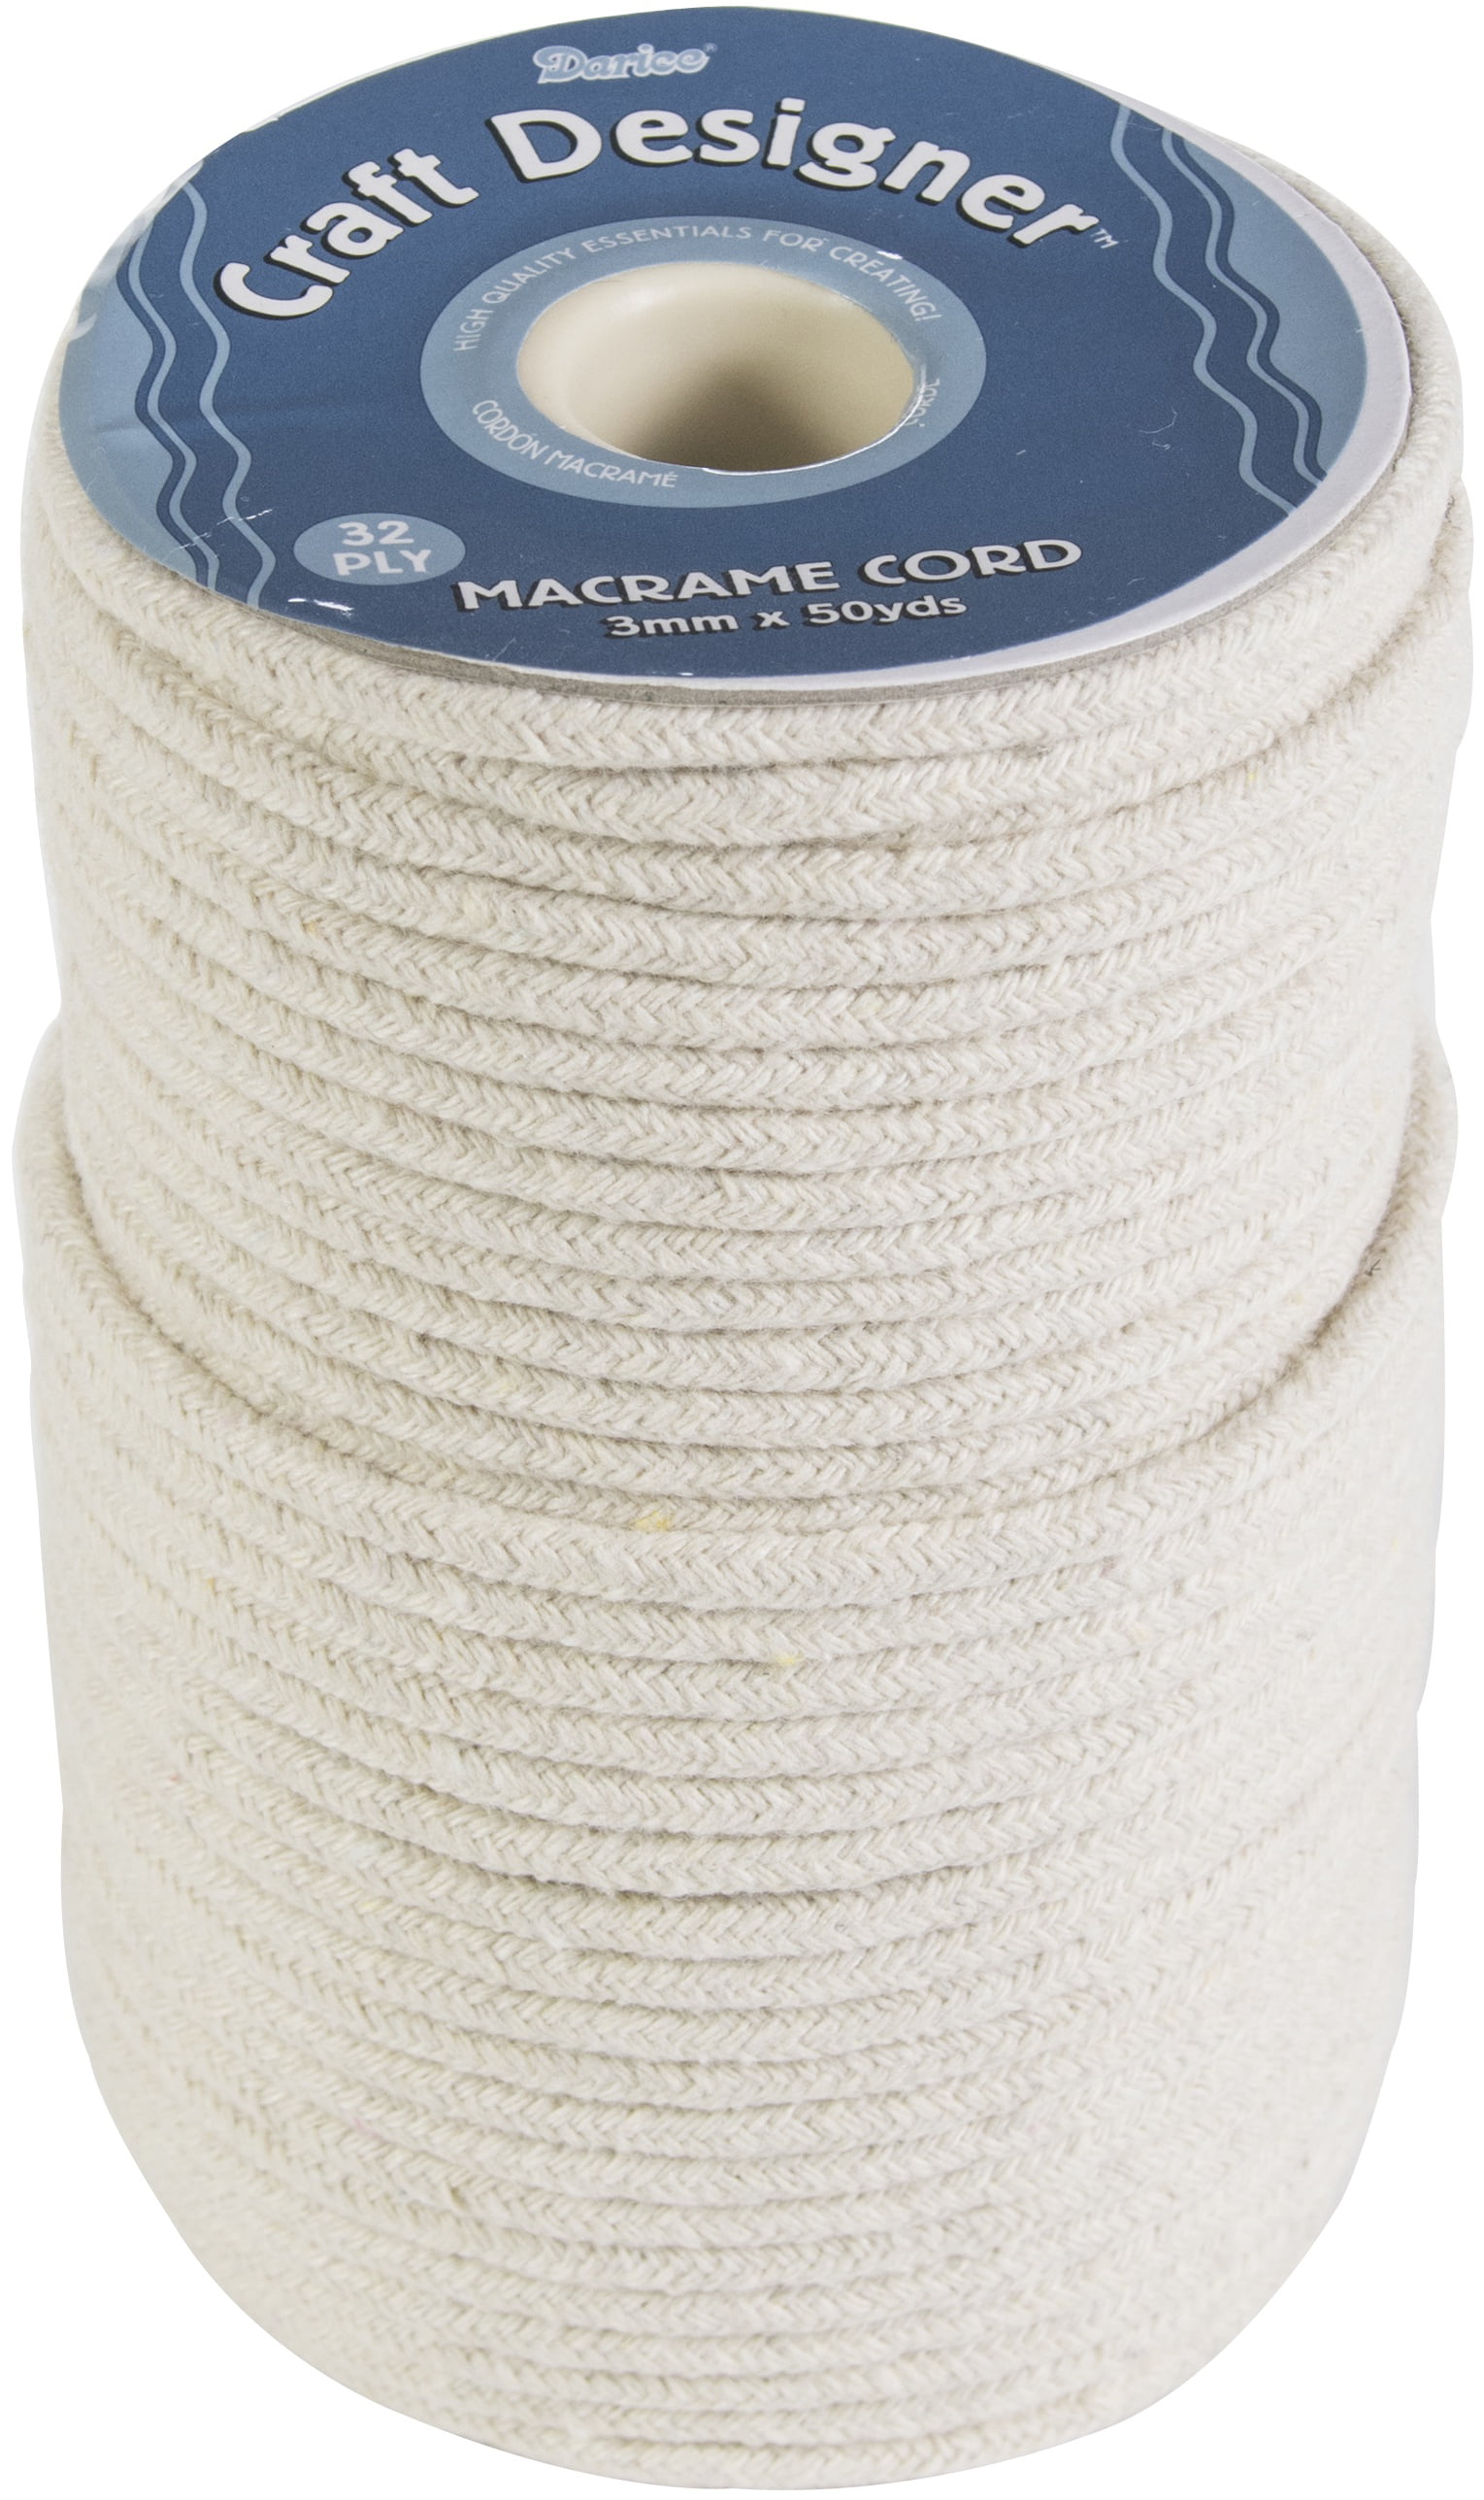 Darice 1971-15 Macrame Cord Natural Cotton 32-Ply 3mmX50yd 